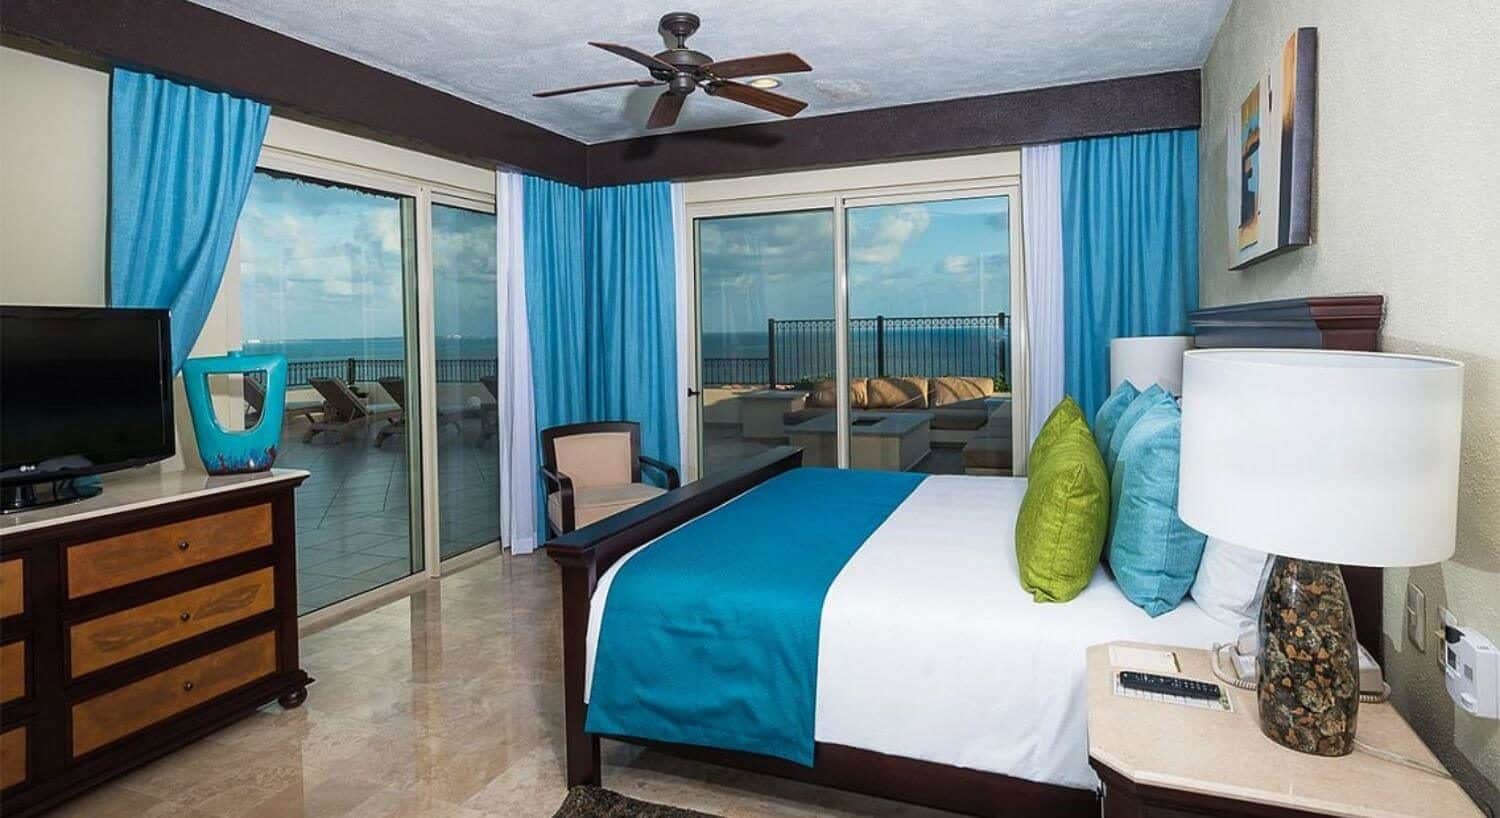 A bedroom with King bed with white, lime green and turquoise bedding, night stands and lamps on either side of the bed, a dresser and flat screen TV on the opposite wall, and sliding glass doors on two of the walls leading to an expansive wrap around terrace with patio furniture, a lounge area with fire pit, and beautiful ocean views.